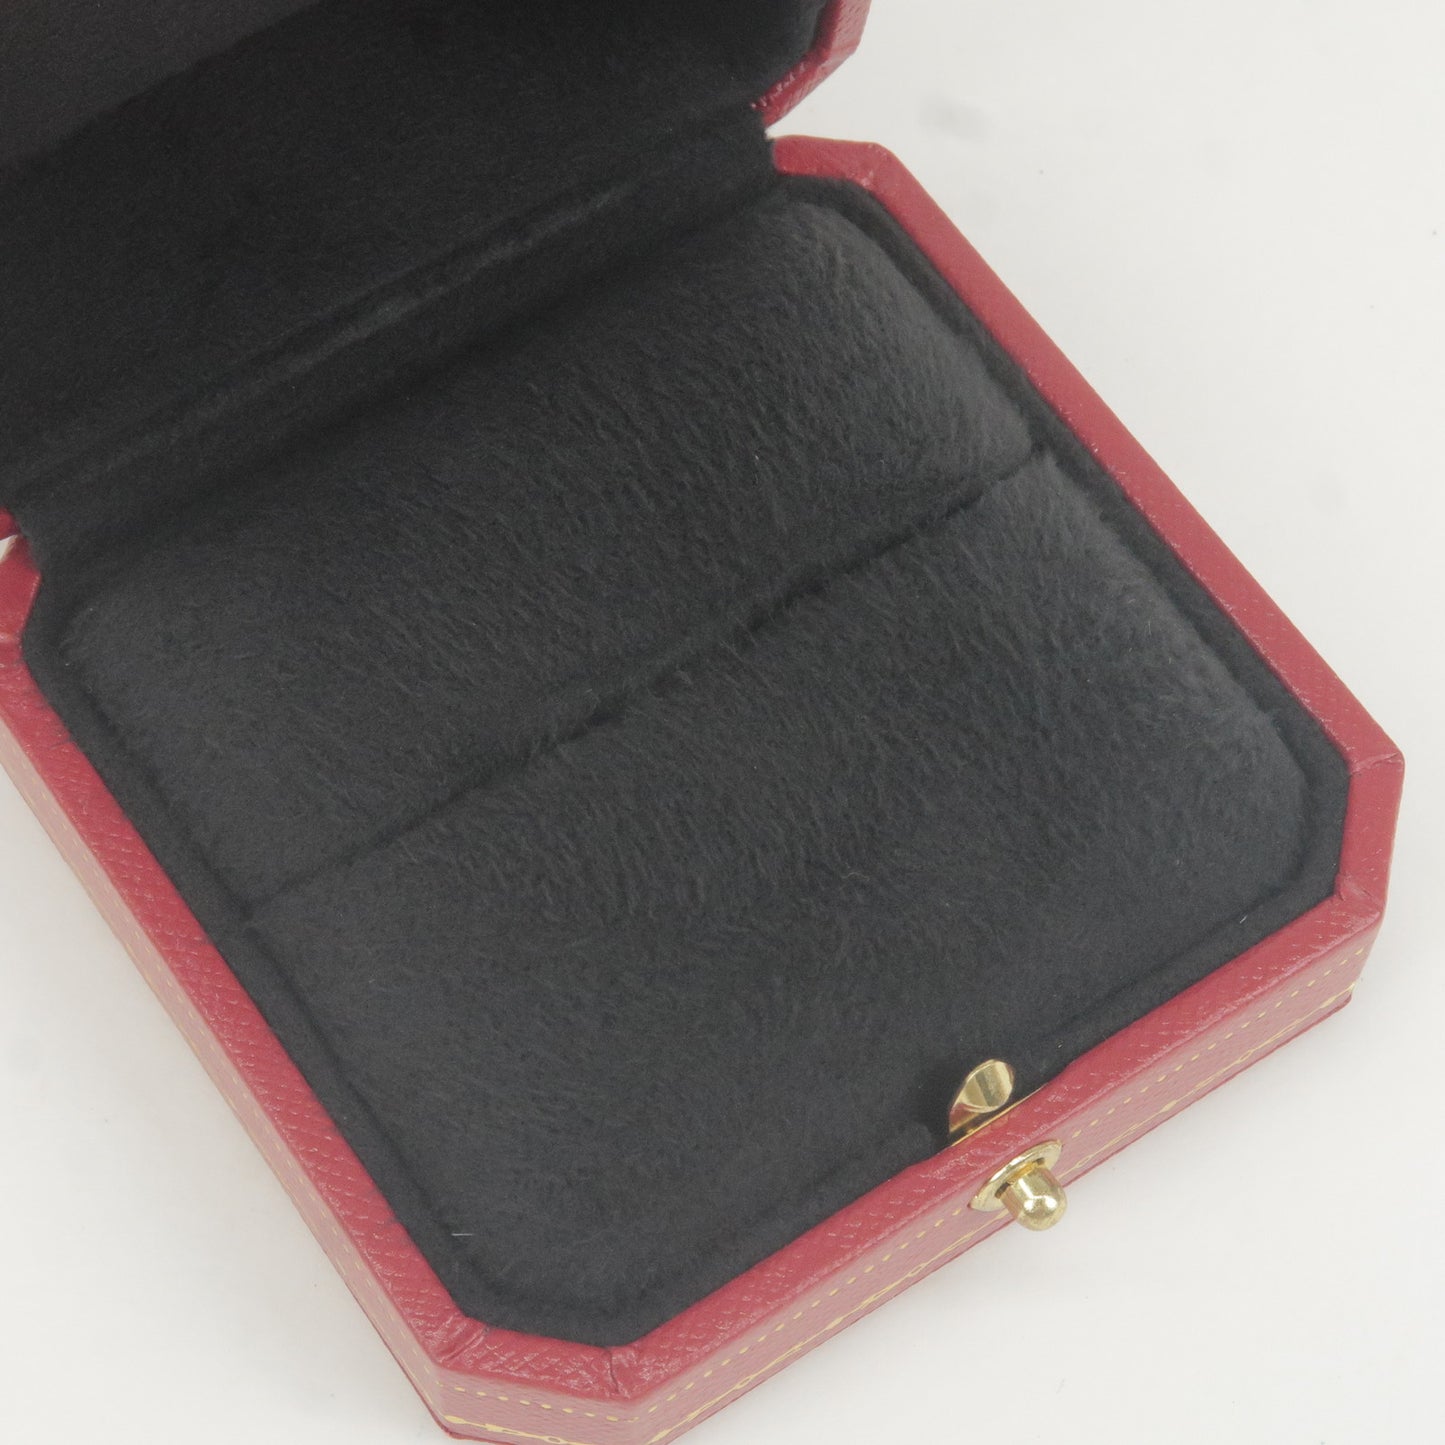 Cartier Set of 2 Ring Box Jewelry Box For Ring Red